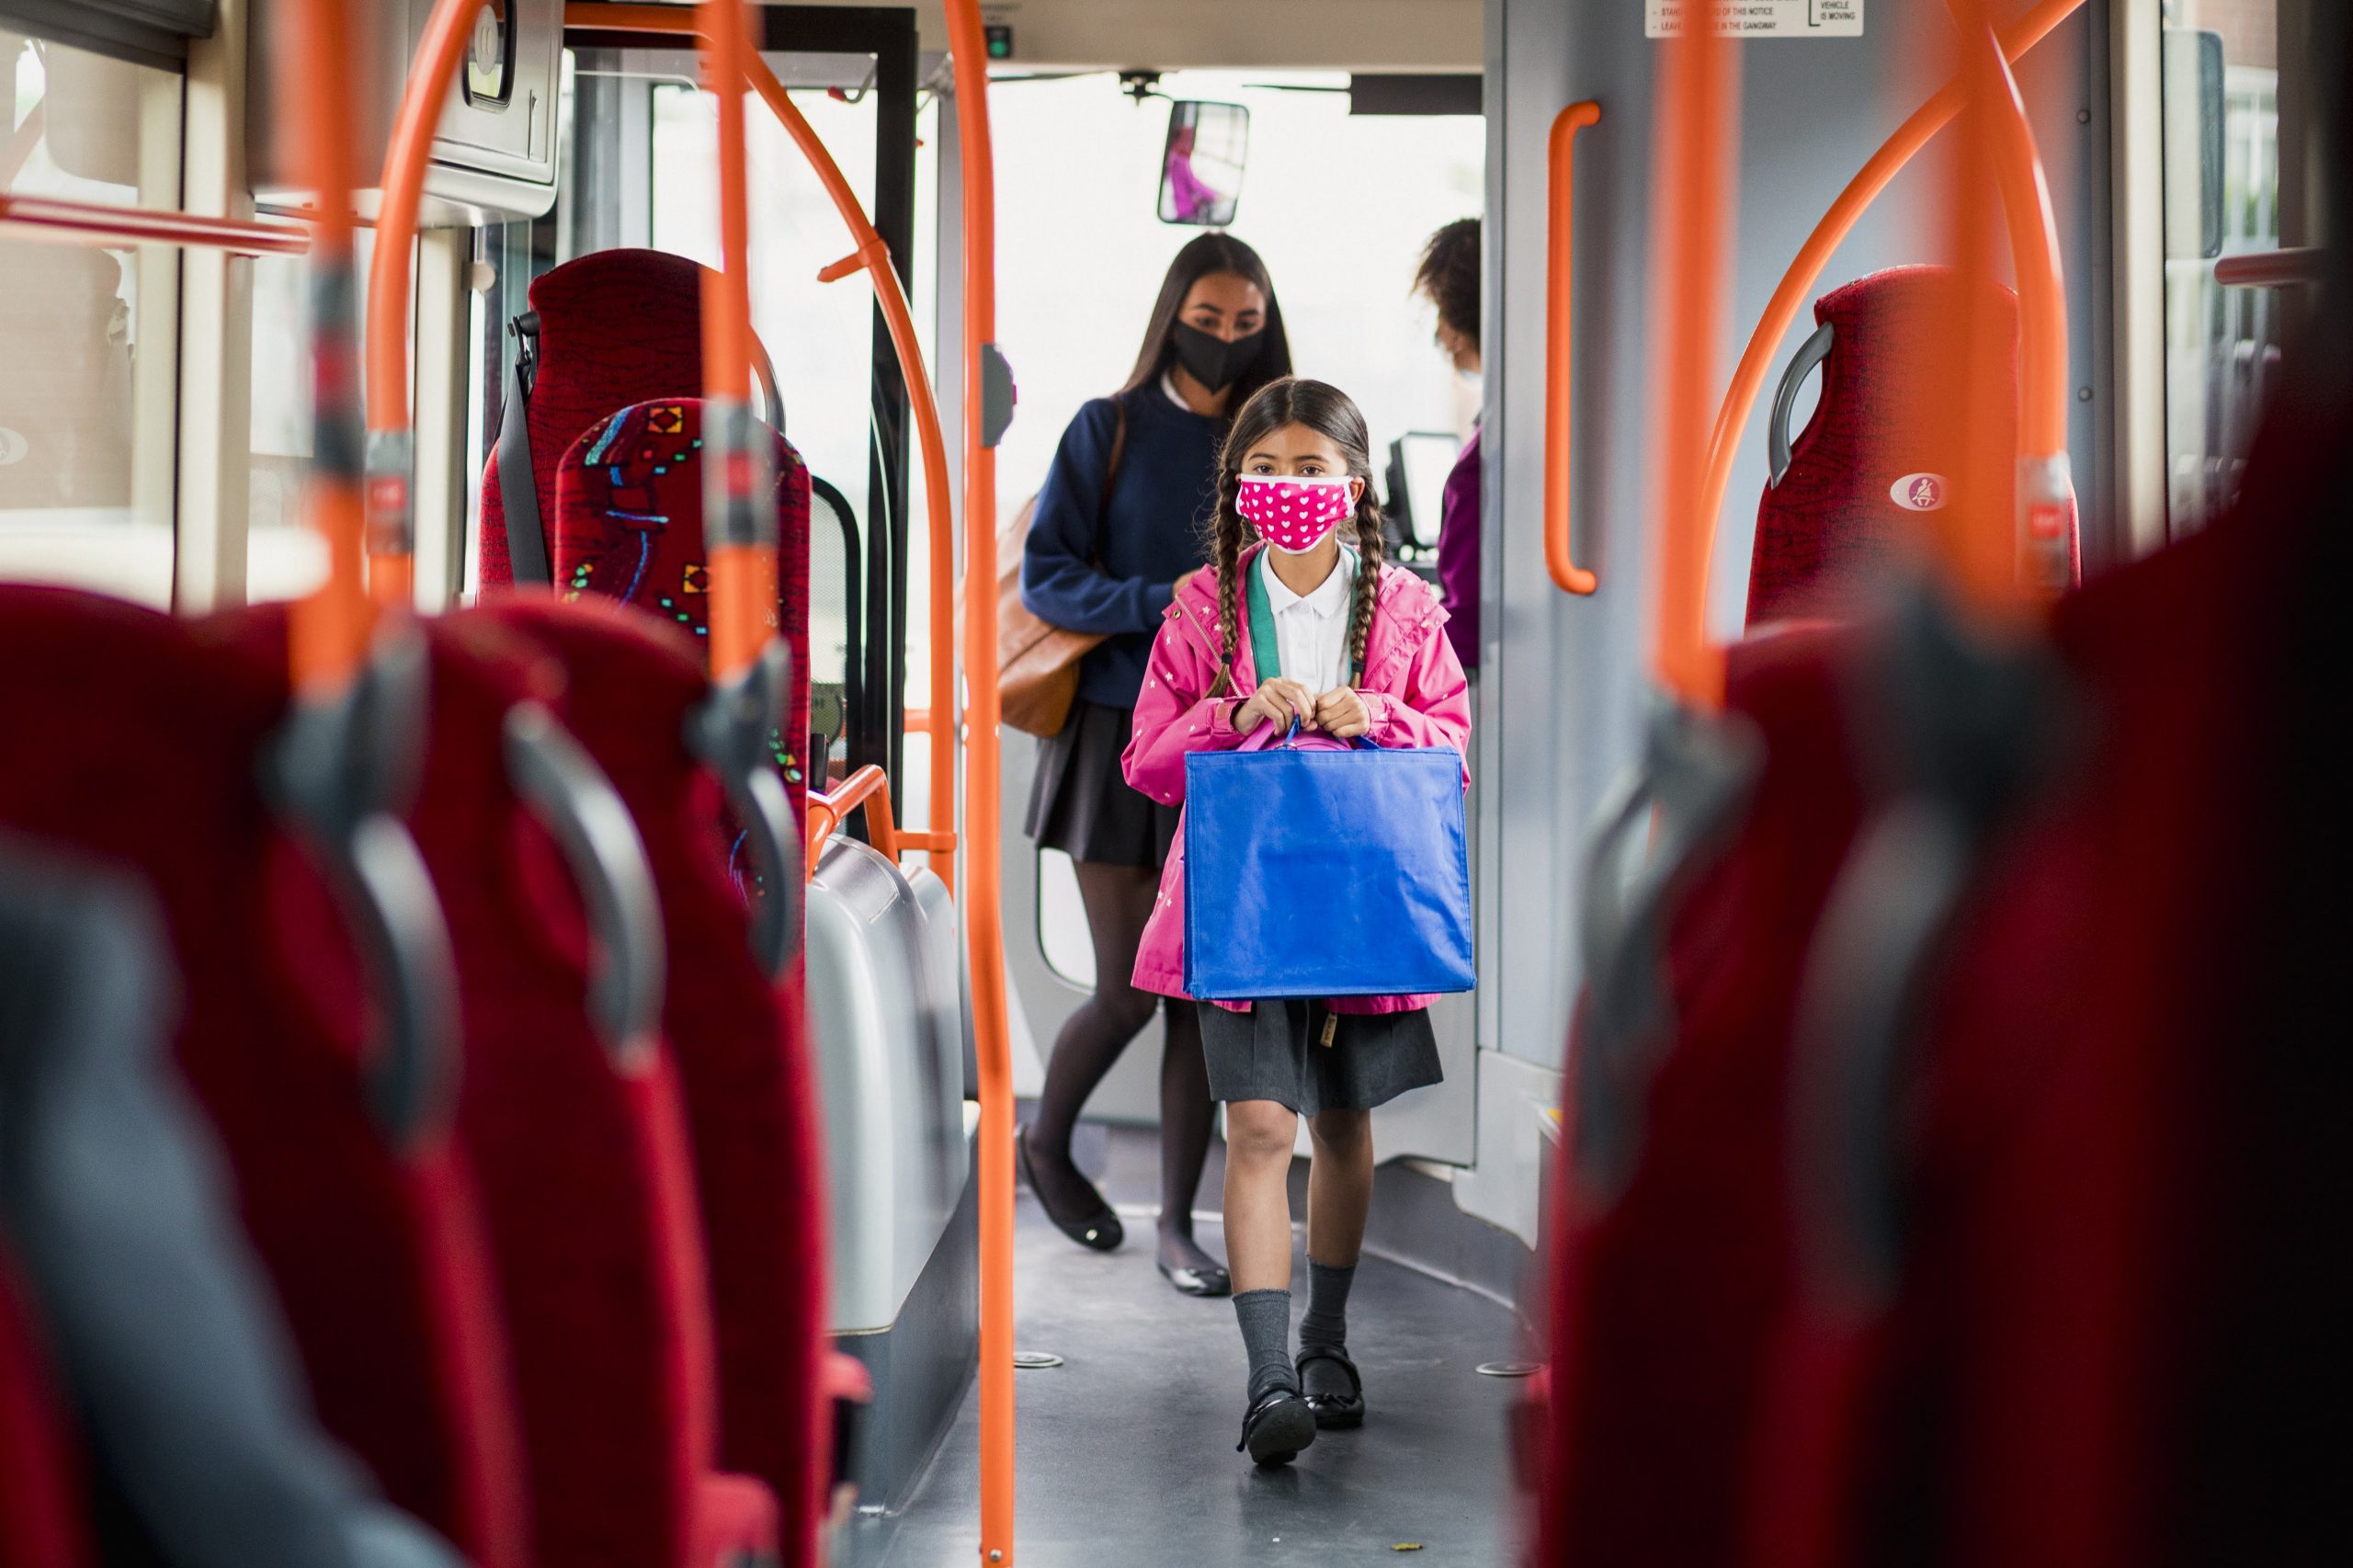 sisters on a public bus wearing masks on their way to school. They are looking for a seat and are wearing their school uniforms.